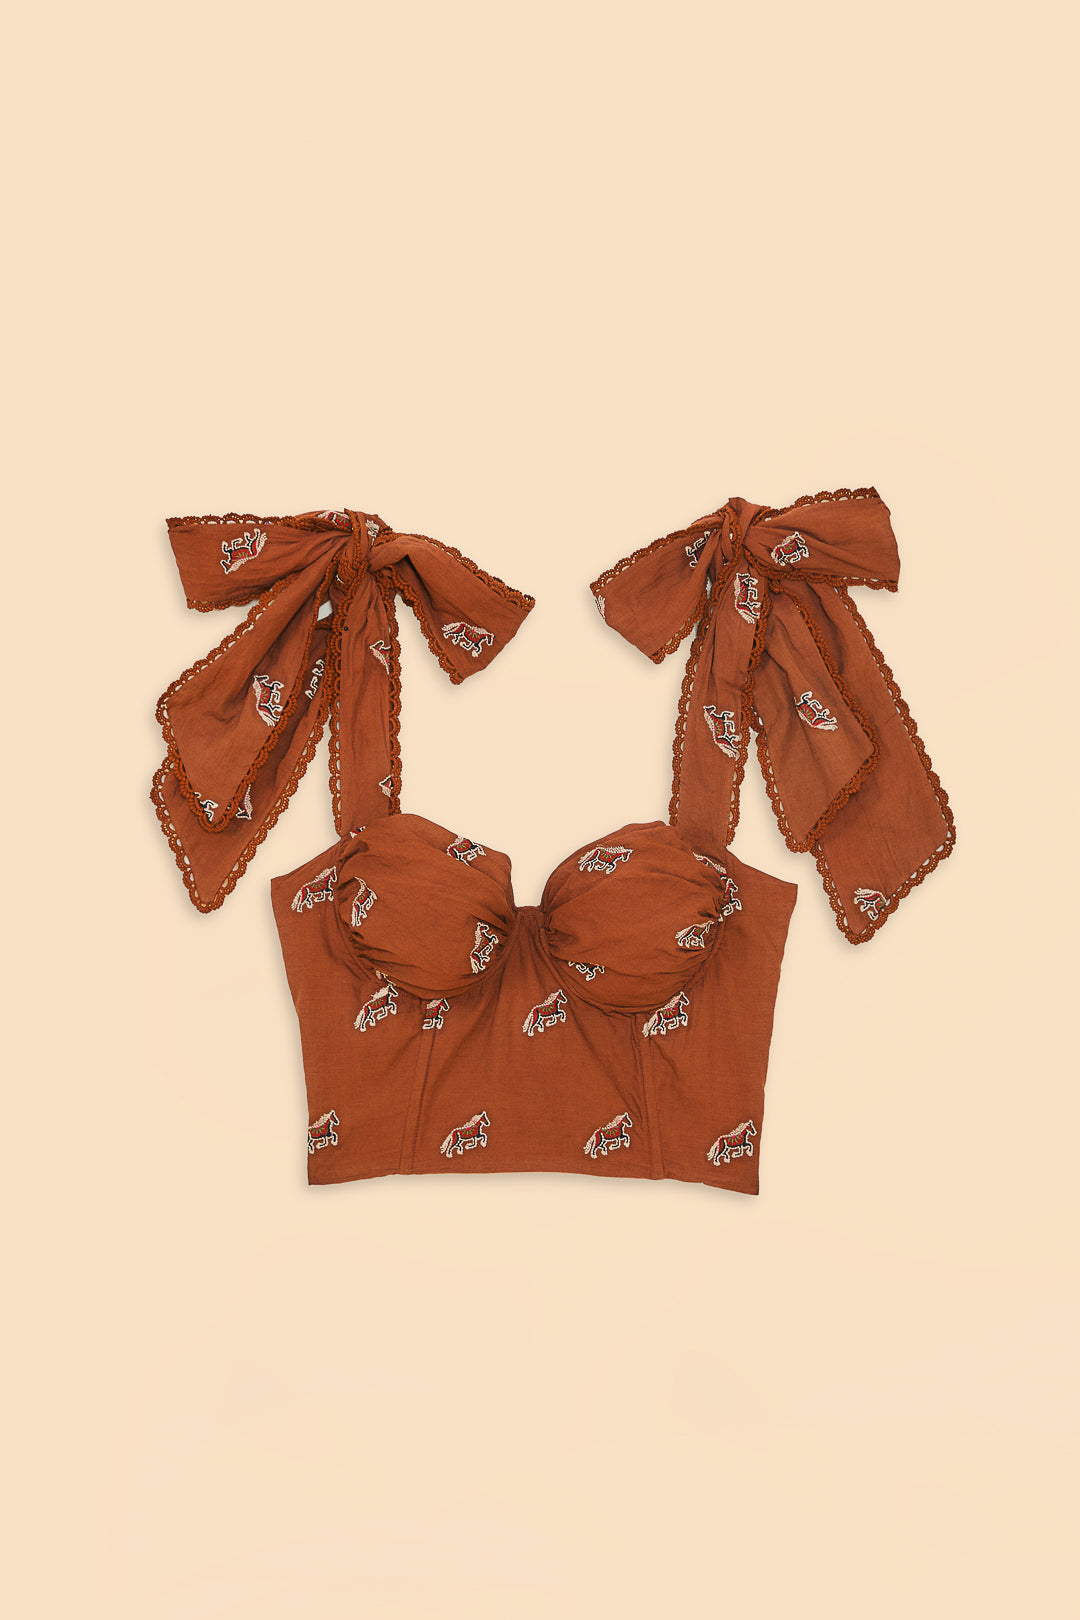 Caramel Embroidered Horses Crop Top